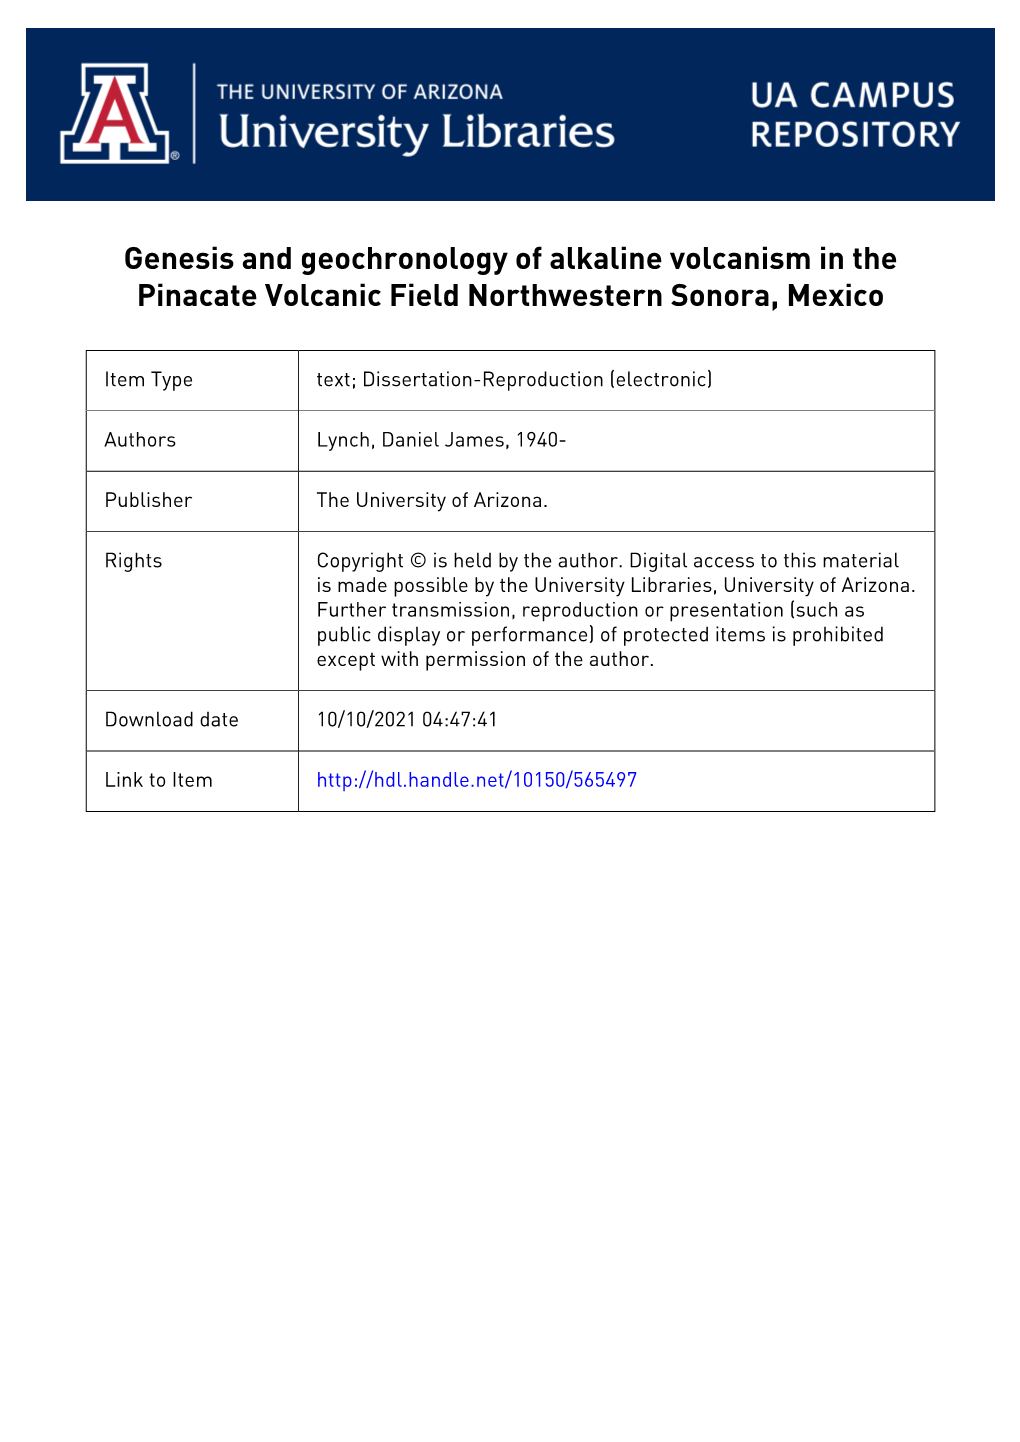 Genesis and Geochronology of Alkaline Volcanism in the Pinacate Volcanic Field Northwestern Sonora, Mexico